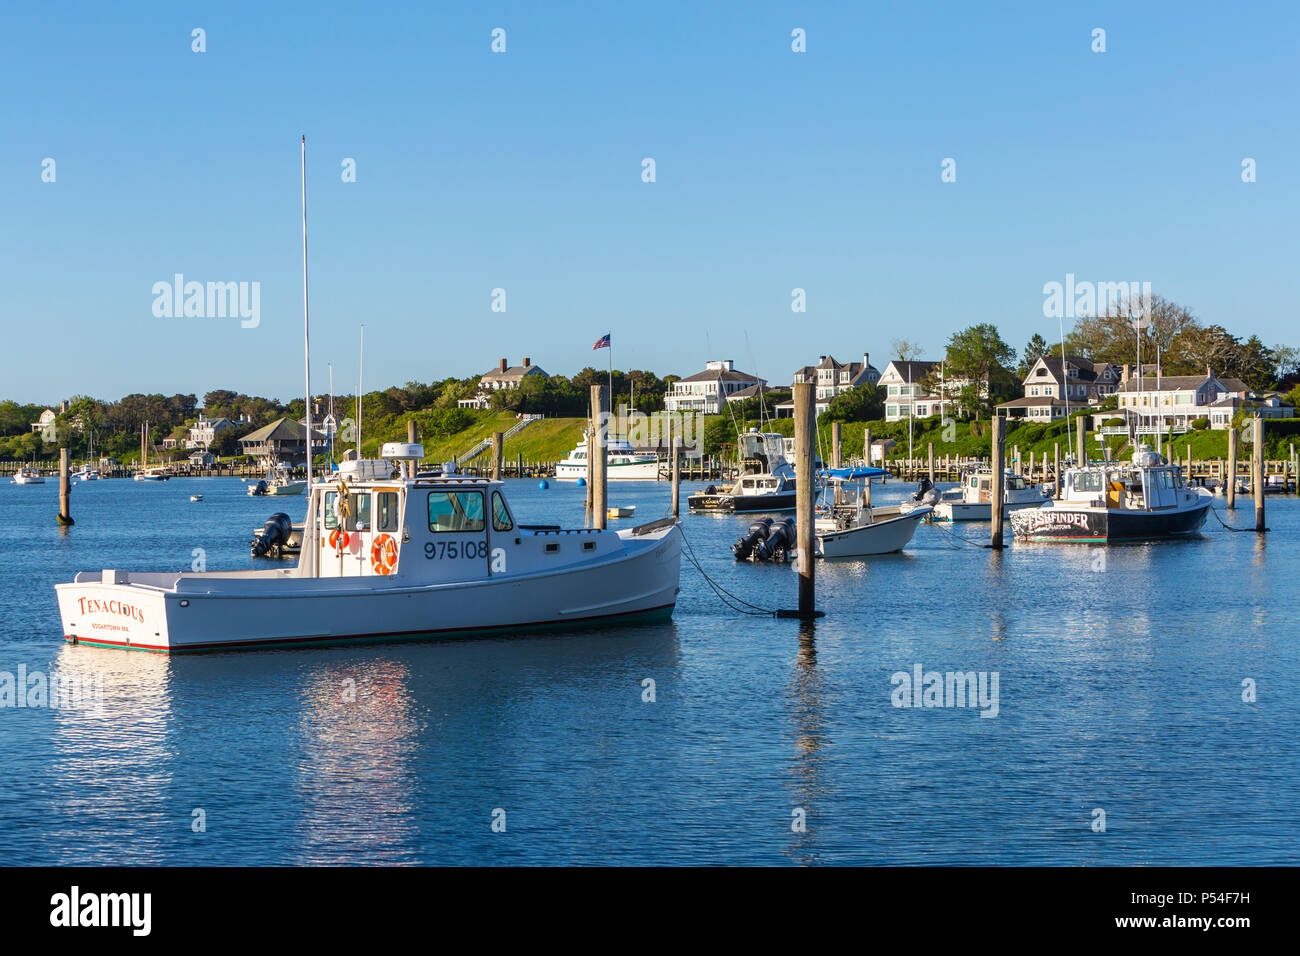 Fishing and pleasure boats moored and docked in the Middle Ground, overlooked by waterfront homes in Edgartown, Massachusetts on Martha's Vineyard. Stock Photo